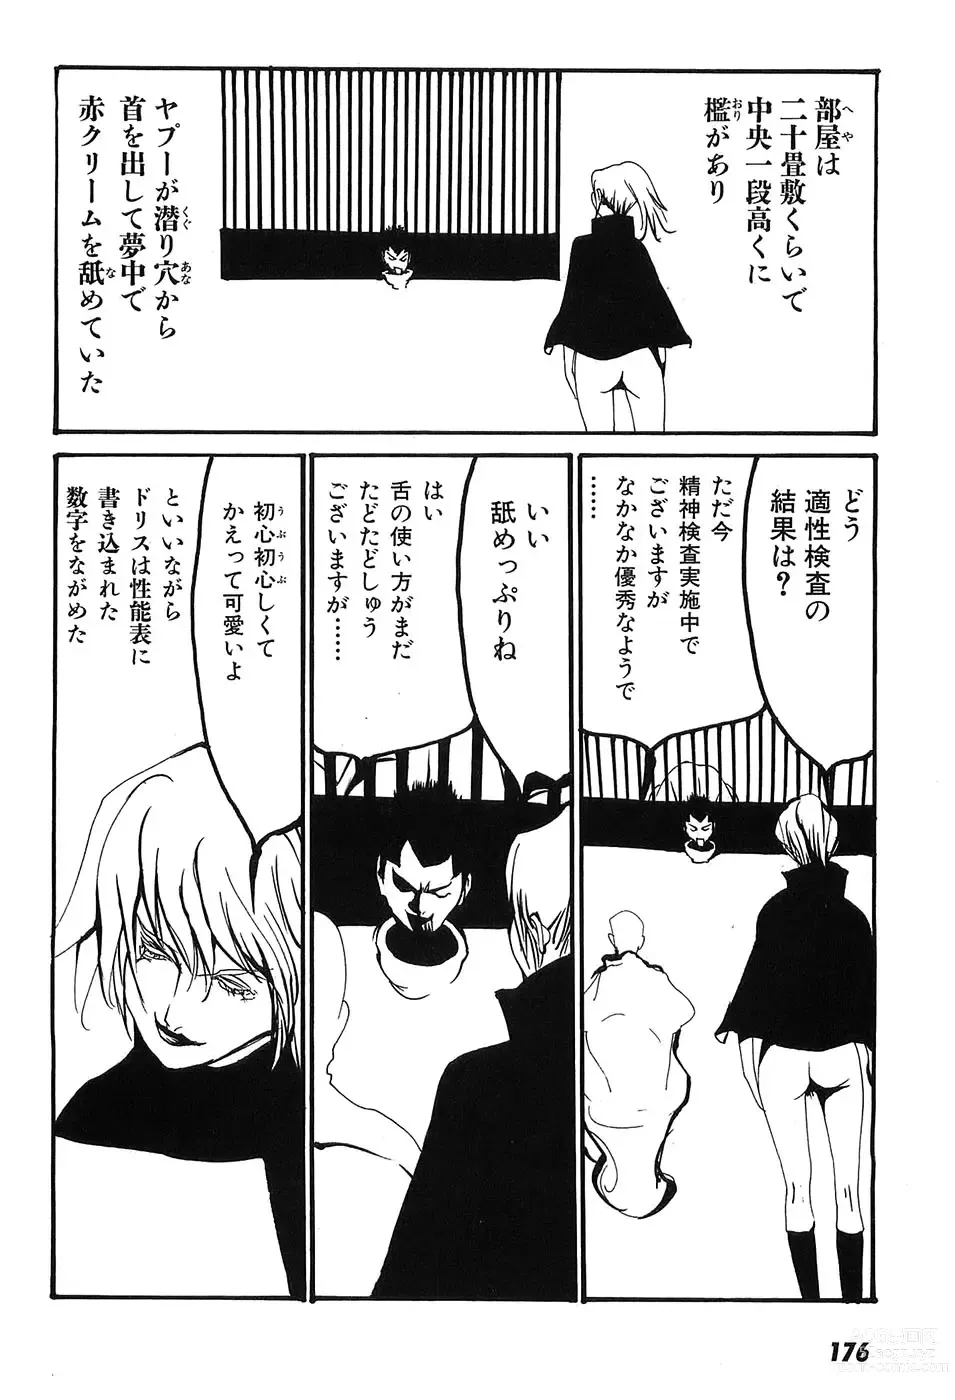 Page 181 of doujinshi Yapoo the human cattle vol.09